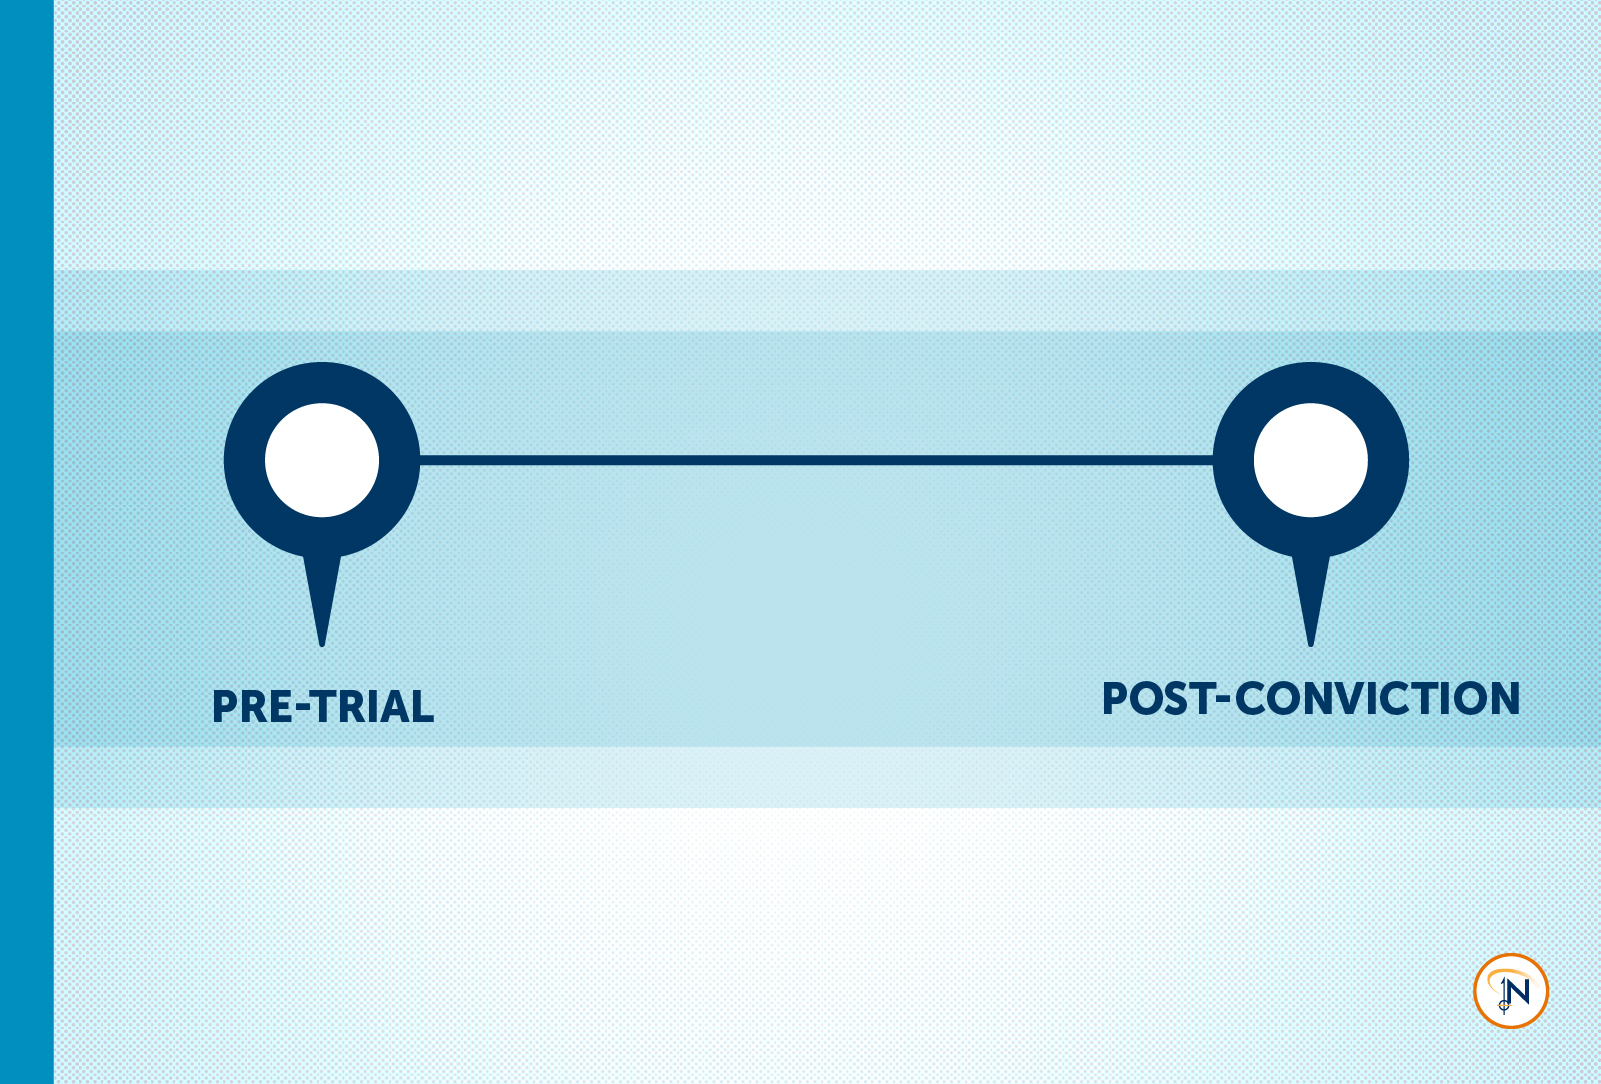 Pre-Trial vs. Post-Conviction: Let’s Keep it Simple